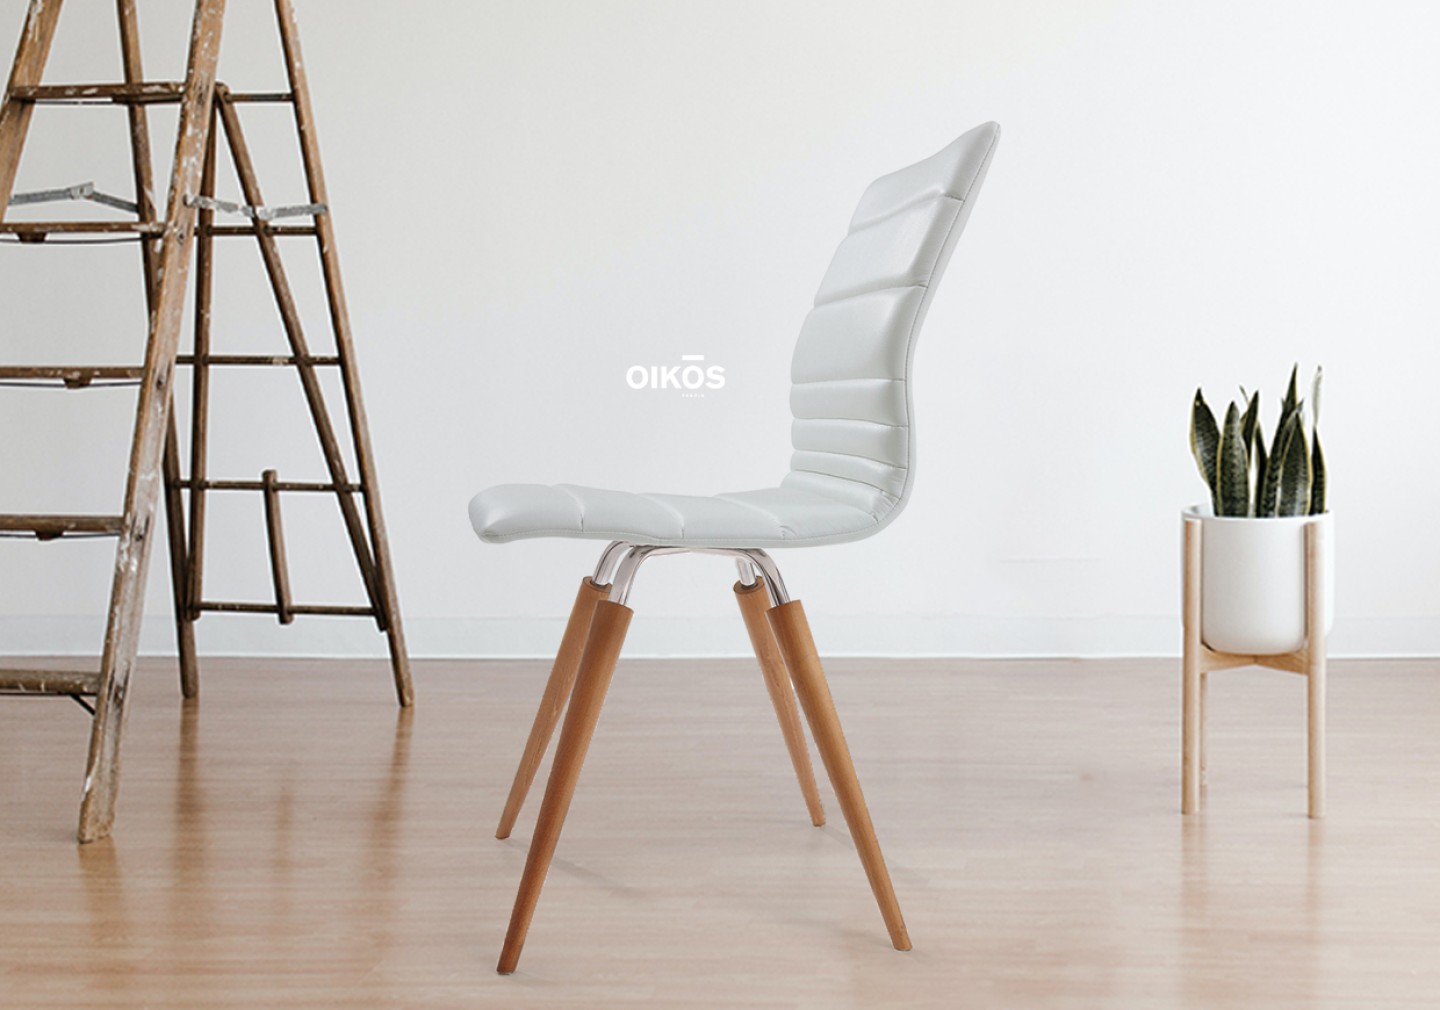 THE S LINE DINING CHAIR